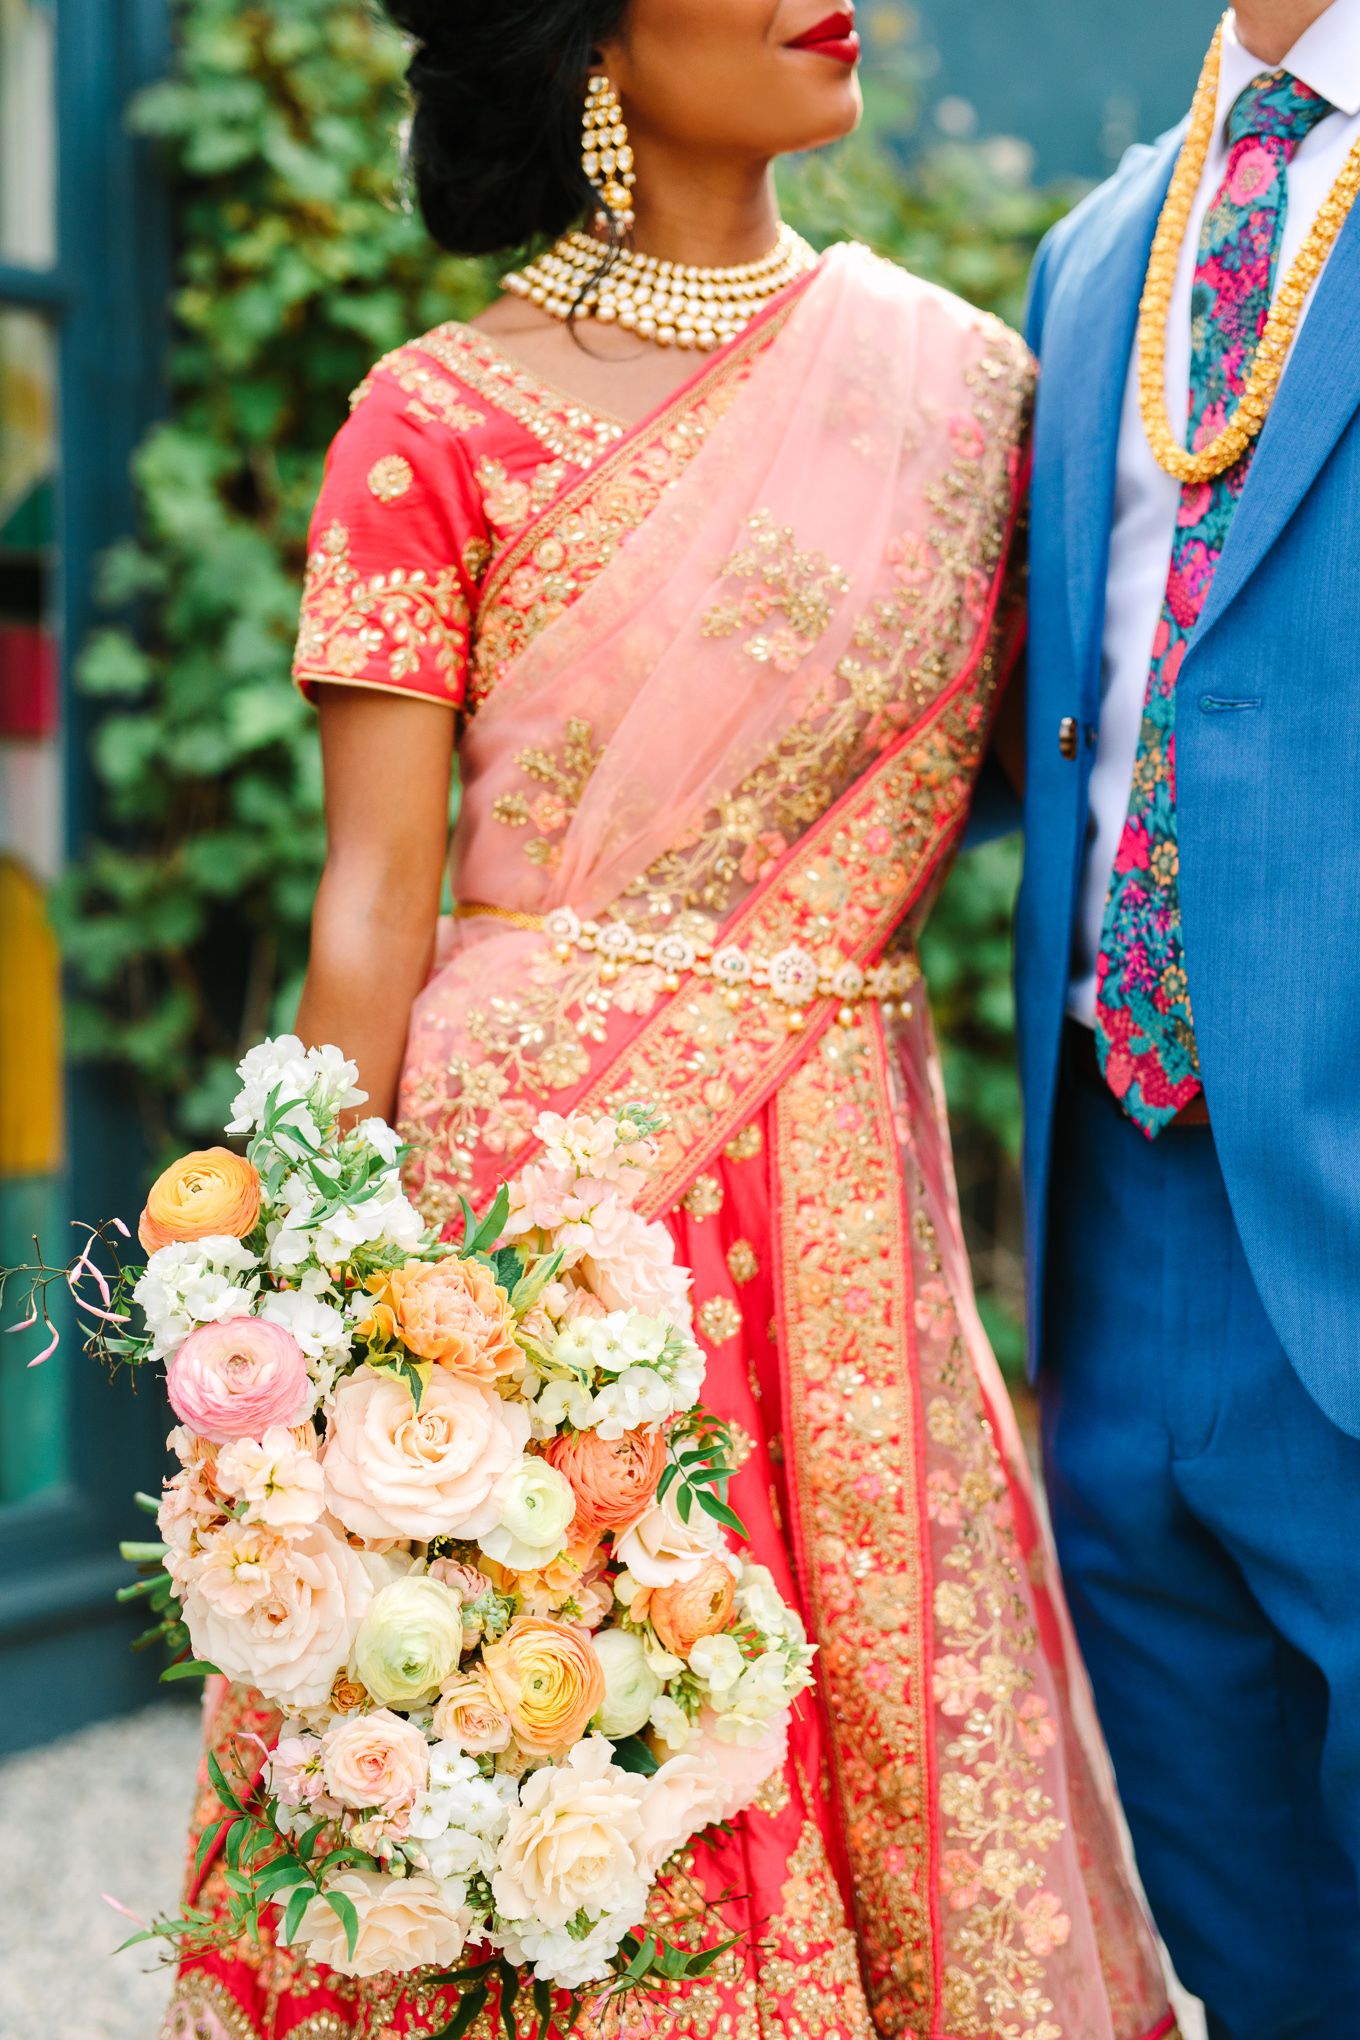 Light peach and neutral wedding flowers for colorful Indian Fusion Fig House wedding | Beautiful bridal bouquet inspiration and advice | Colorful and elevated wedding photography for fun-loving couples in Southern California | #weddingflowers #weddingbouquet #bridebouquet #bouquetideas #uniquebouquet   Source: Mary Costa Photography | Los Angeles